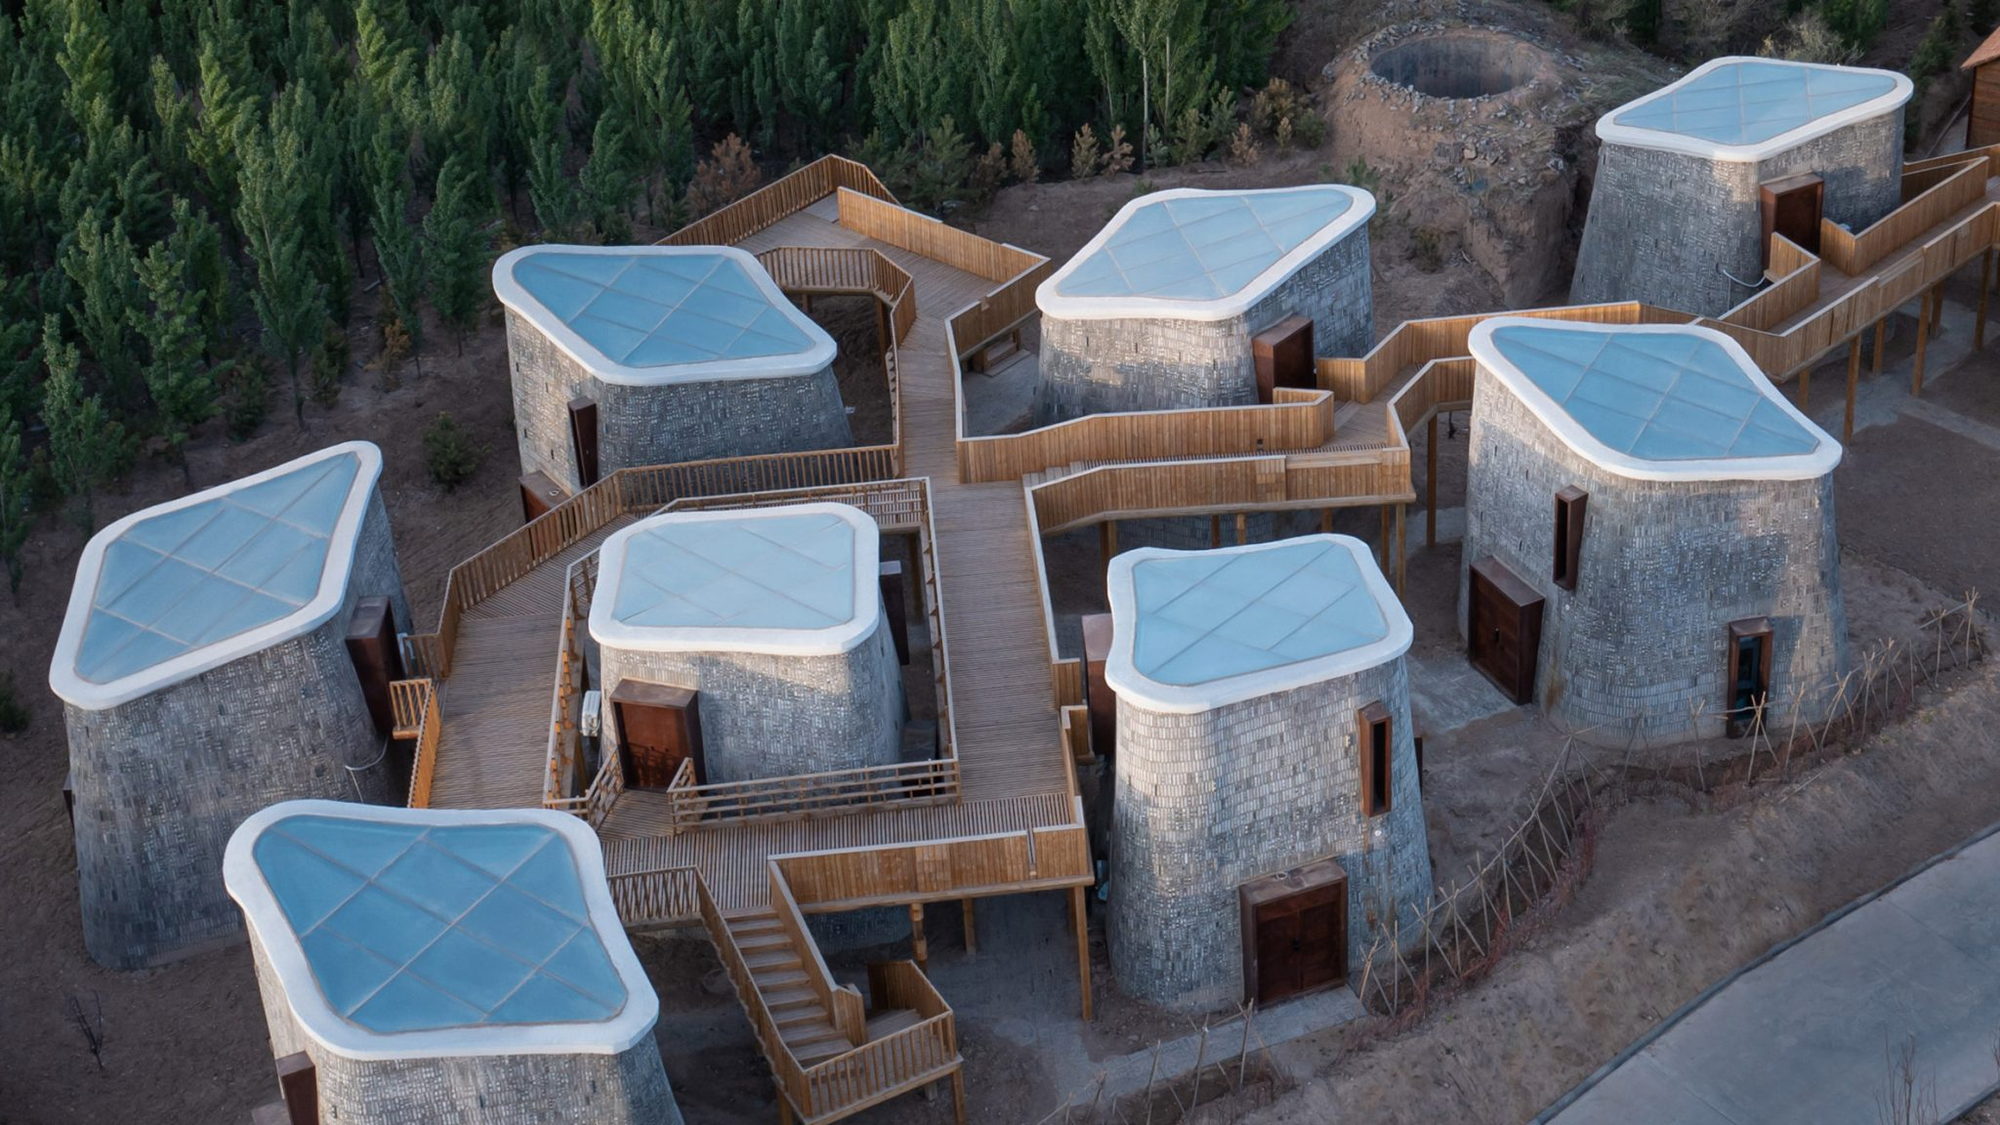 Chinese Retreat Designed to Mimic Ancient Cave Dwellings